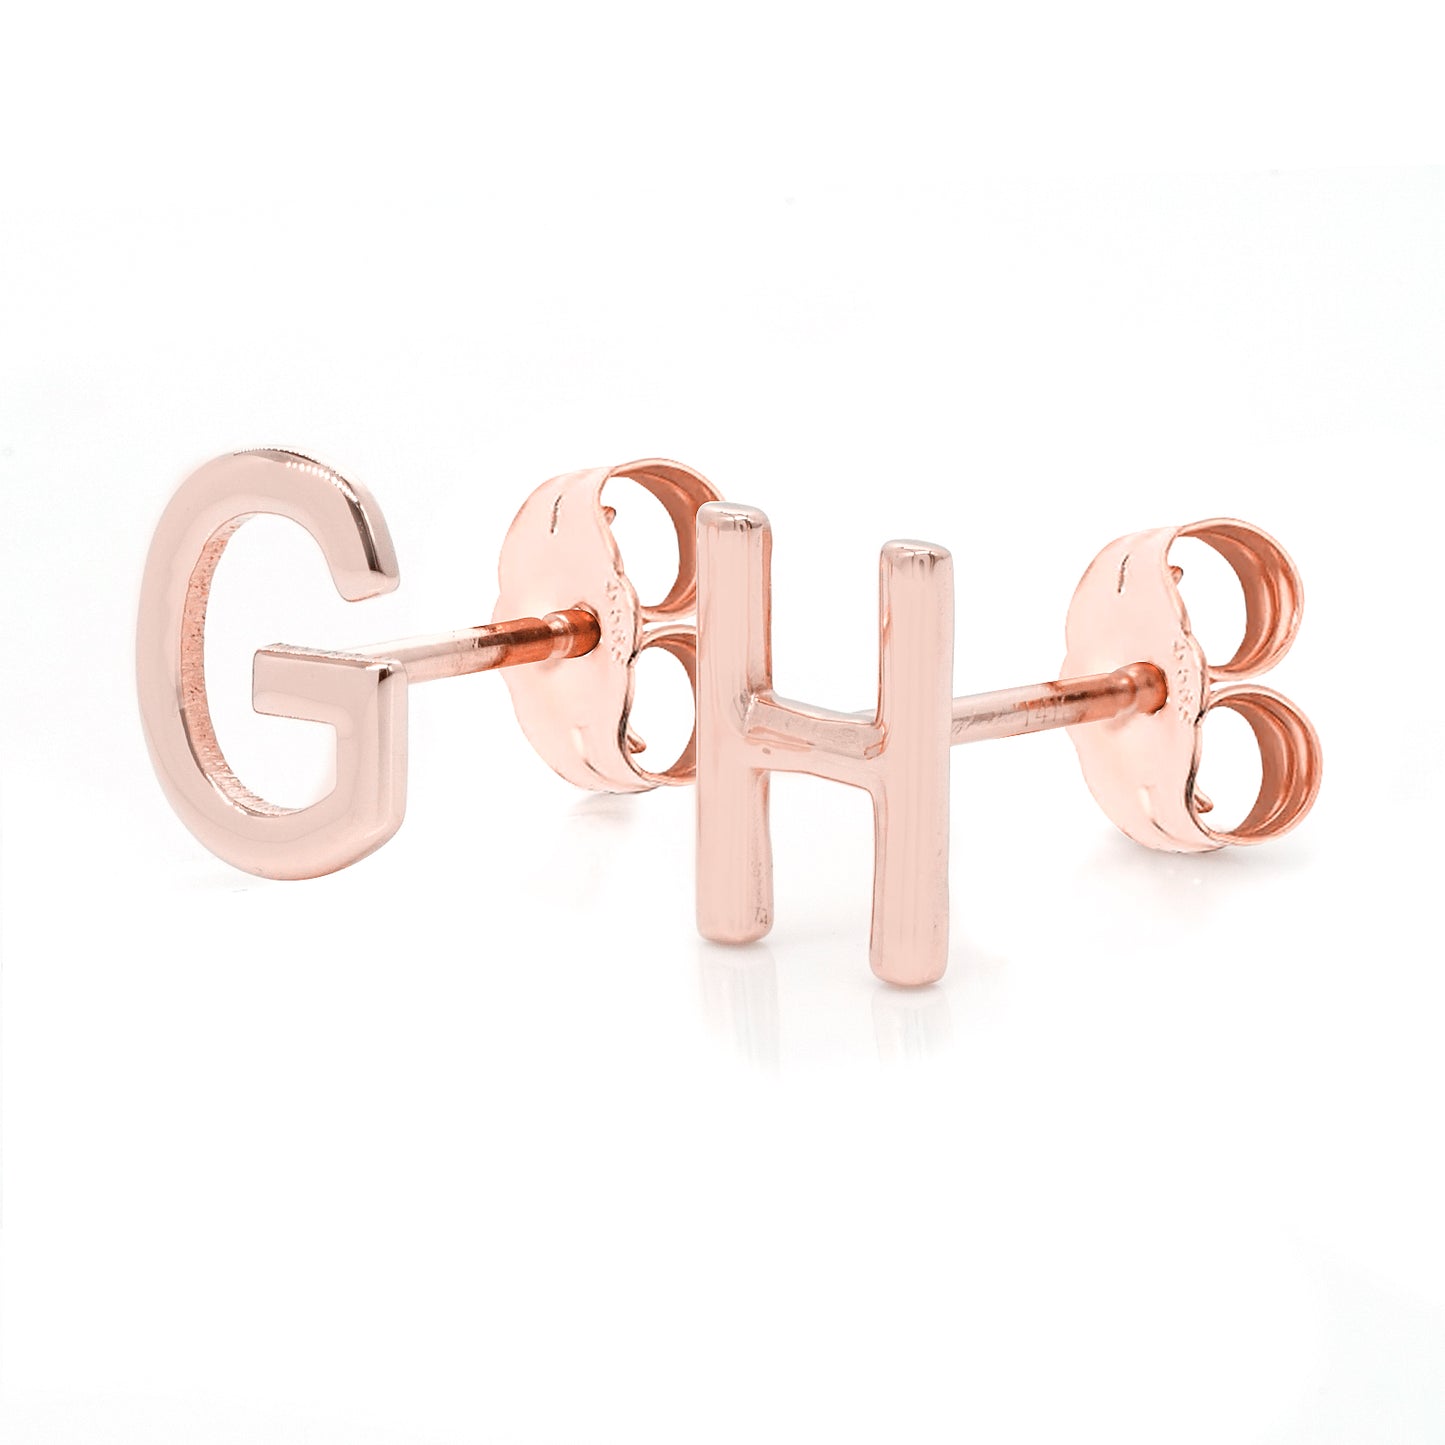 Customized Initial Stud Earrings in 14K Solid Gold